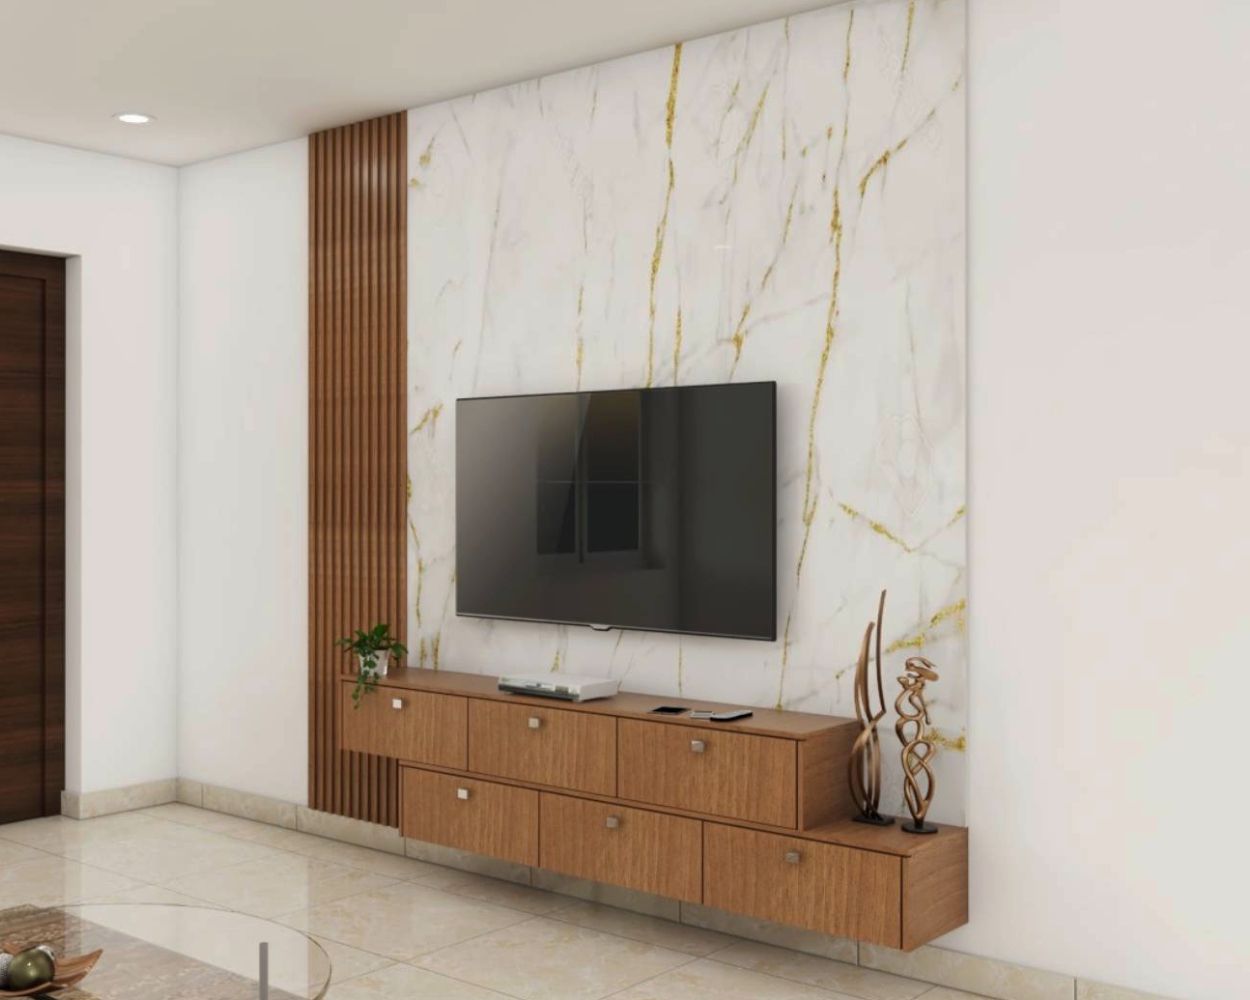 Modern Persian Walnut TV Unit Design With Stacked Wooden Console And Marble Accent Wall